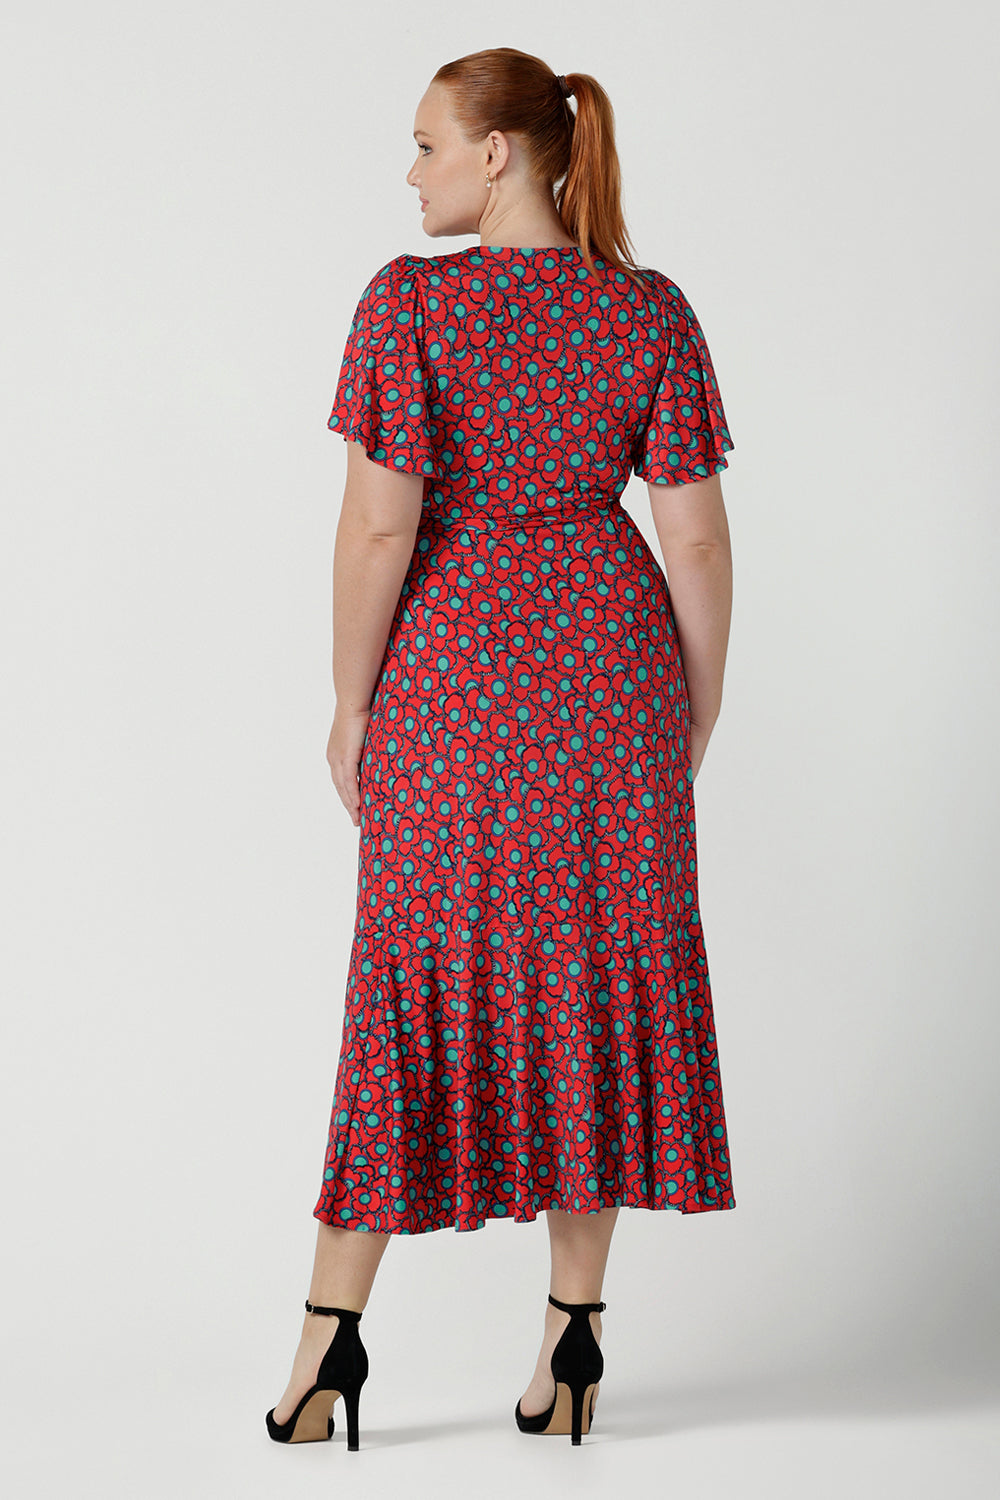 Back view of a size 12 curvy woman wearing a size 12 wrap dress in soft slinky jersey. The beautiful Rio print has seventies inspired florals with aqua.Romantic valentines day dressing, frill hem and flutter sleeve for curvy women size 8 - 24.